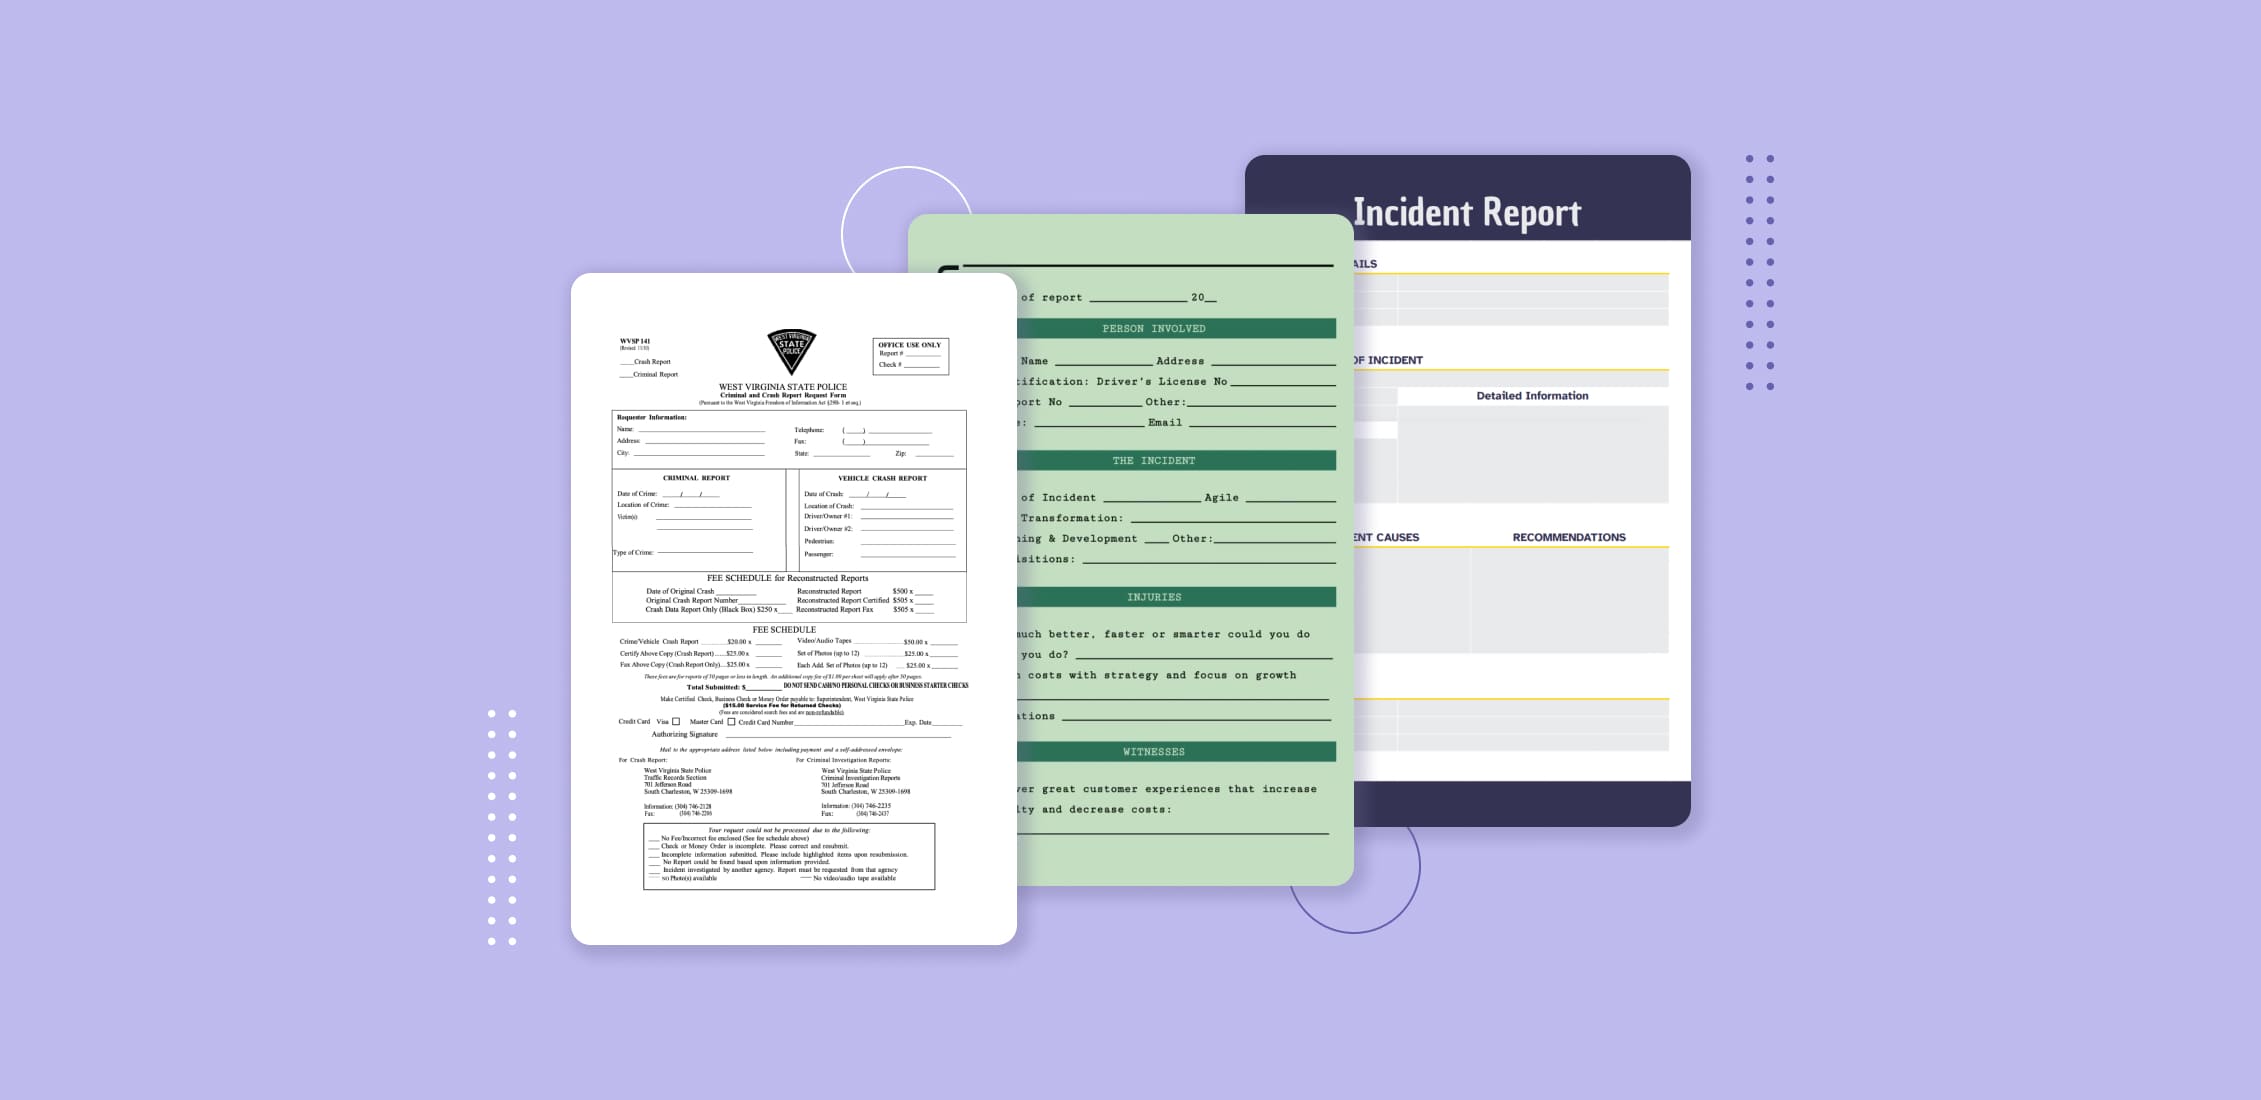 25 Best Police Report Templates For 2023 Featured Image 153 